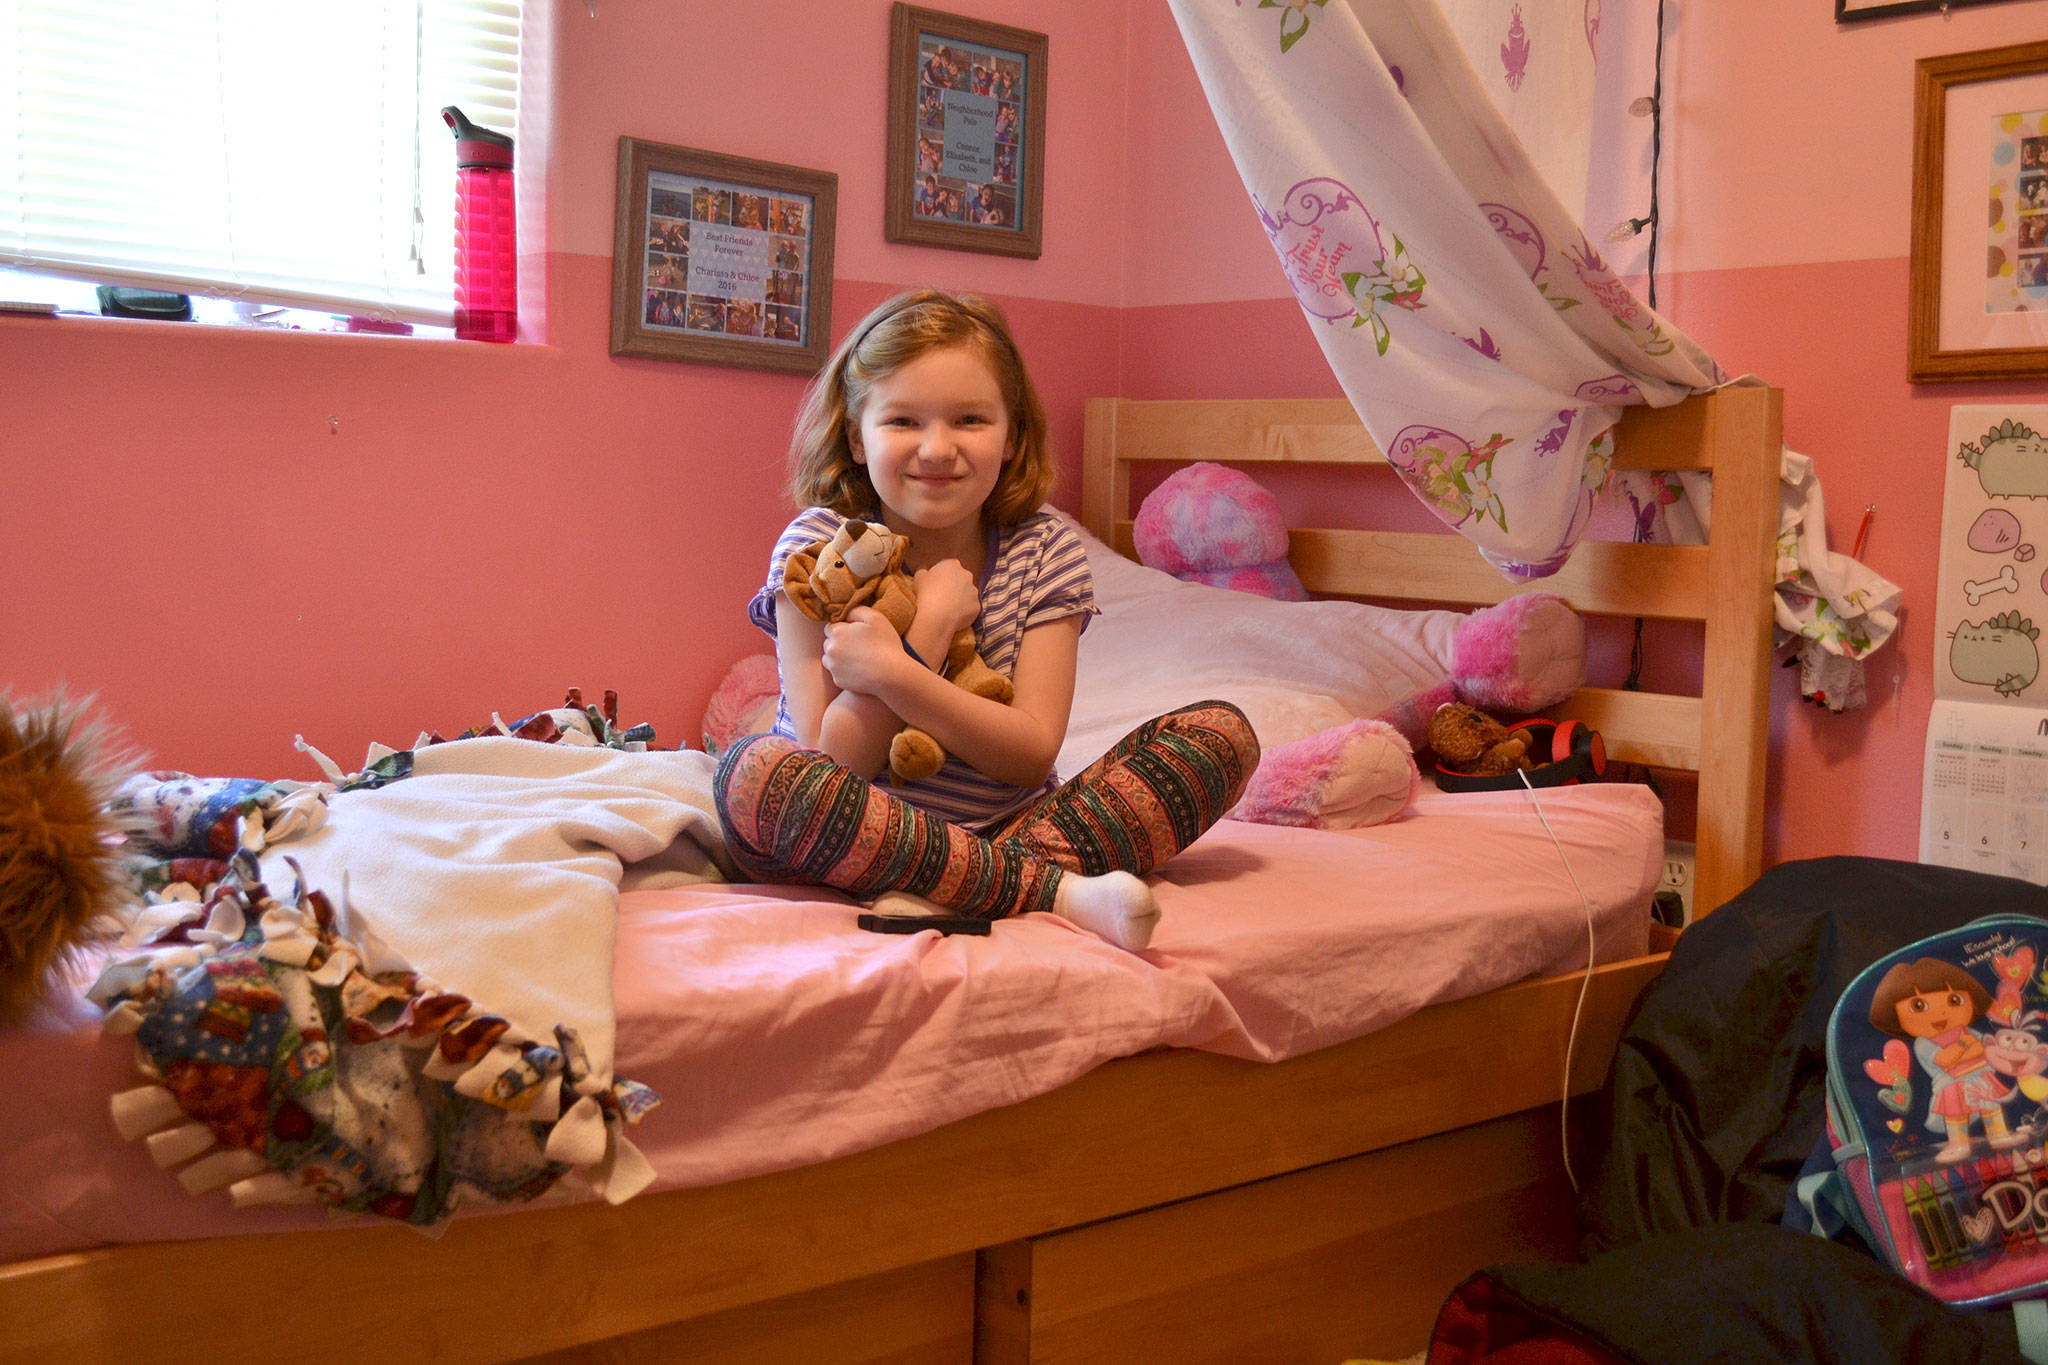 Chloe Loucks, 9, was diagnosed with Type 1 diabetes in 2011 and she’s been operating an insulin pump since 2012. For her diabetes care she travels to Seattle Children’s, like many other local diabetics because there isn’t a local endocrinologist working full-time in the area. Sequim Gazette photos by Matthew Nash